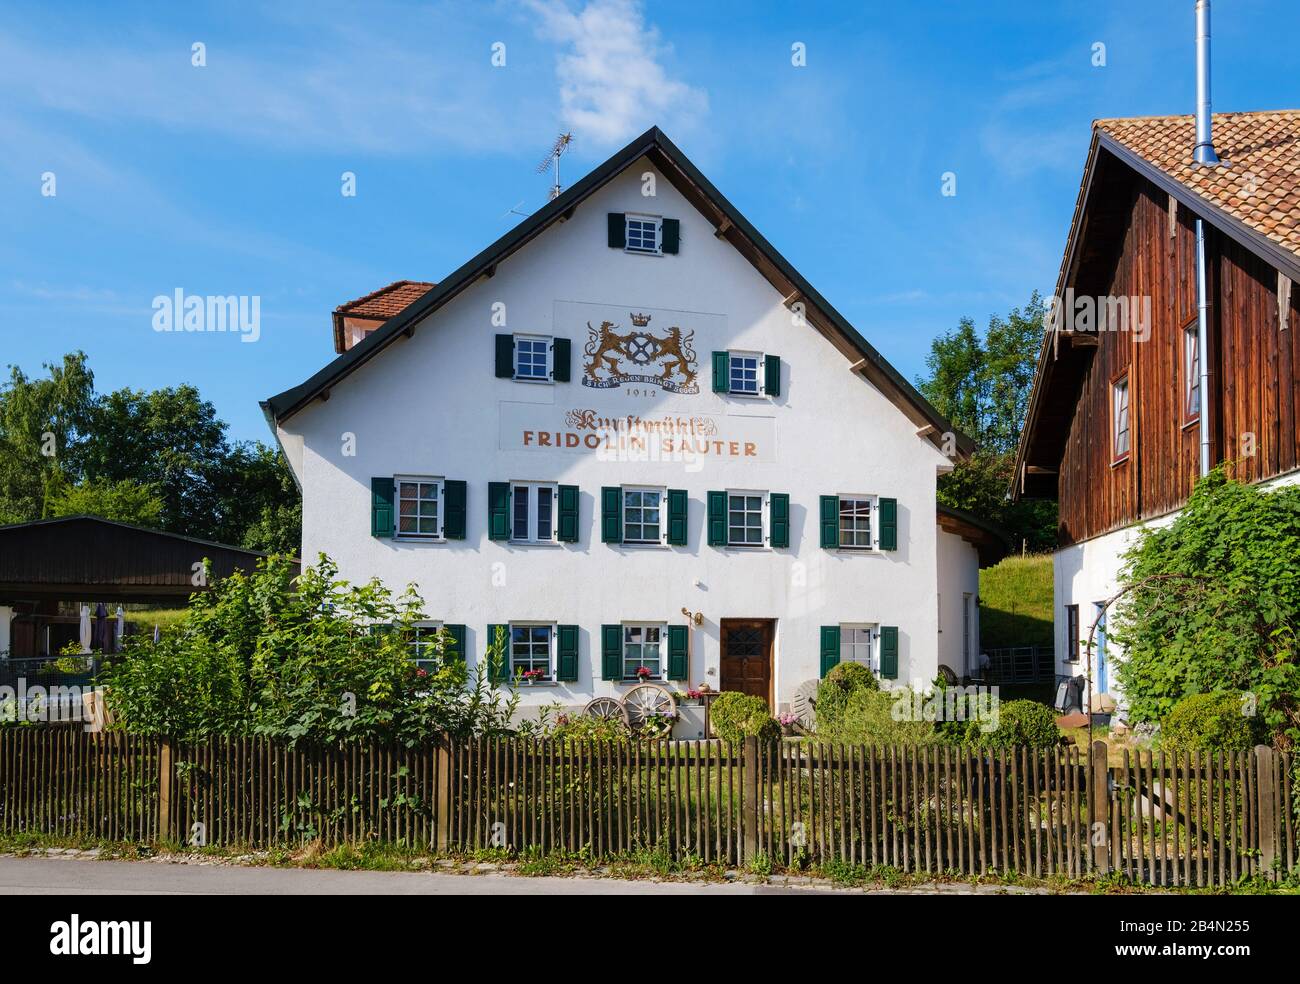 old apartment building with the inscription Kunstmühle Fridolin Sauter, Utting am Ammersee, Funfseenland, Upper Bavaria, Bavaria, Germany Stock Photo